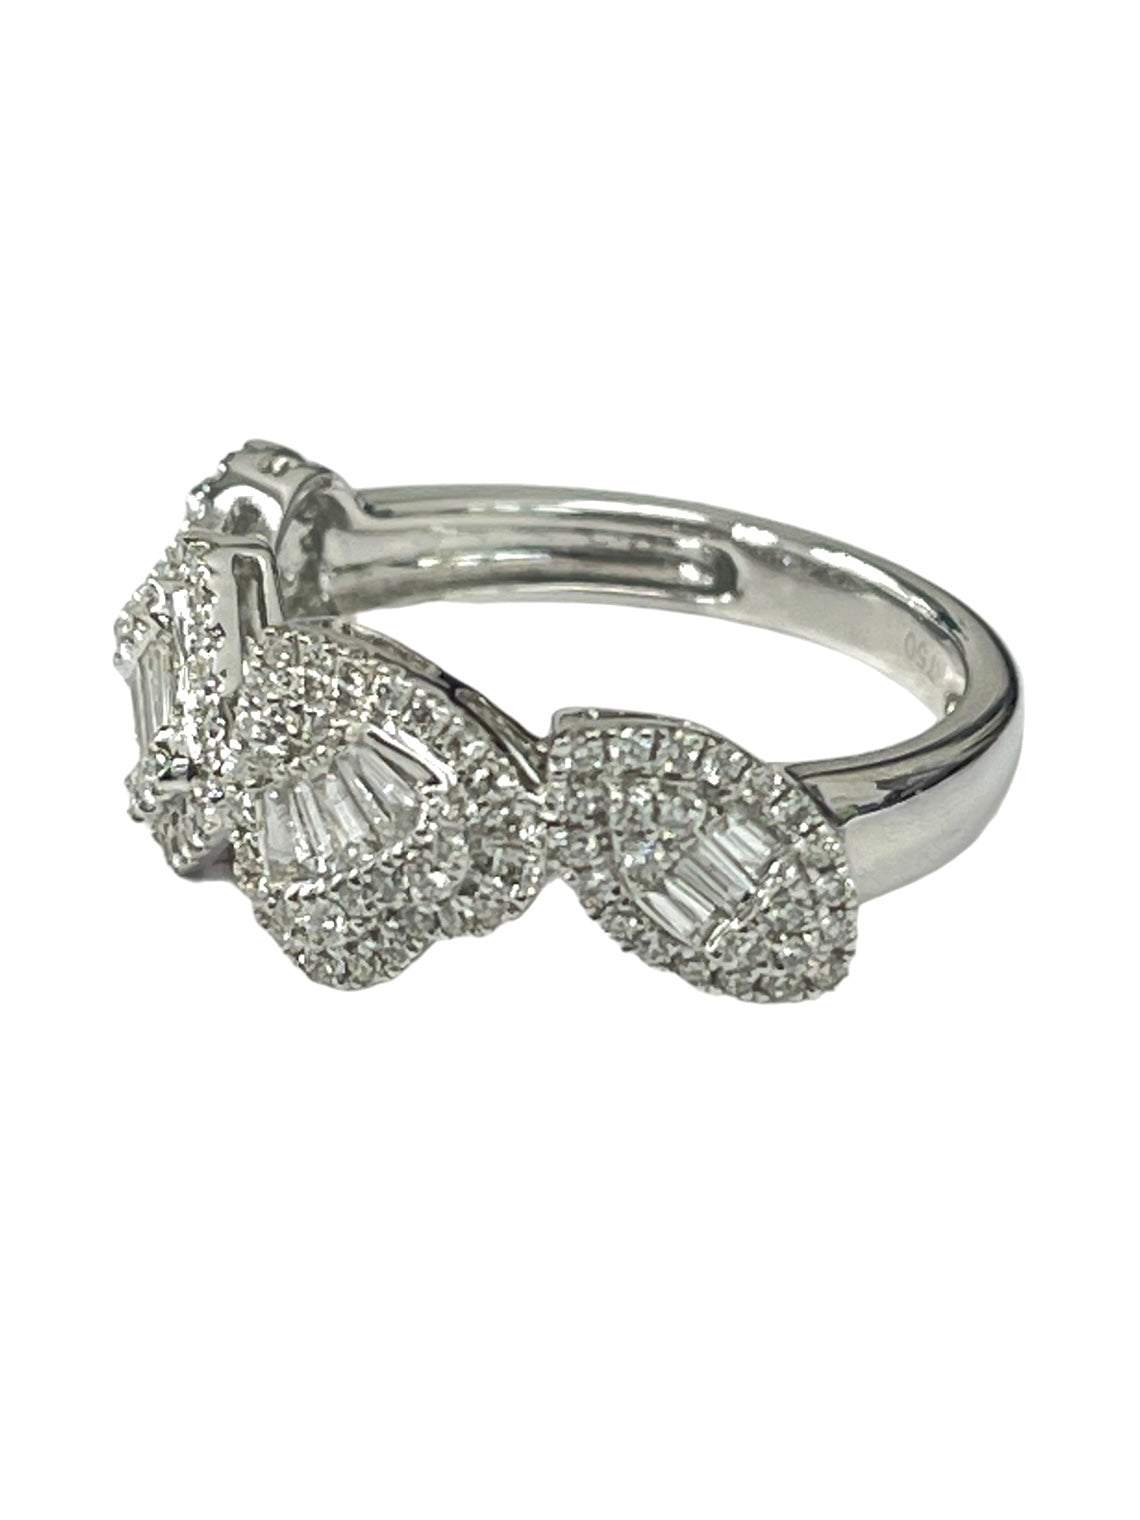 Mixed Shapes Cluster Diamond Ring White Gold 18kt